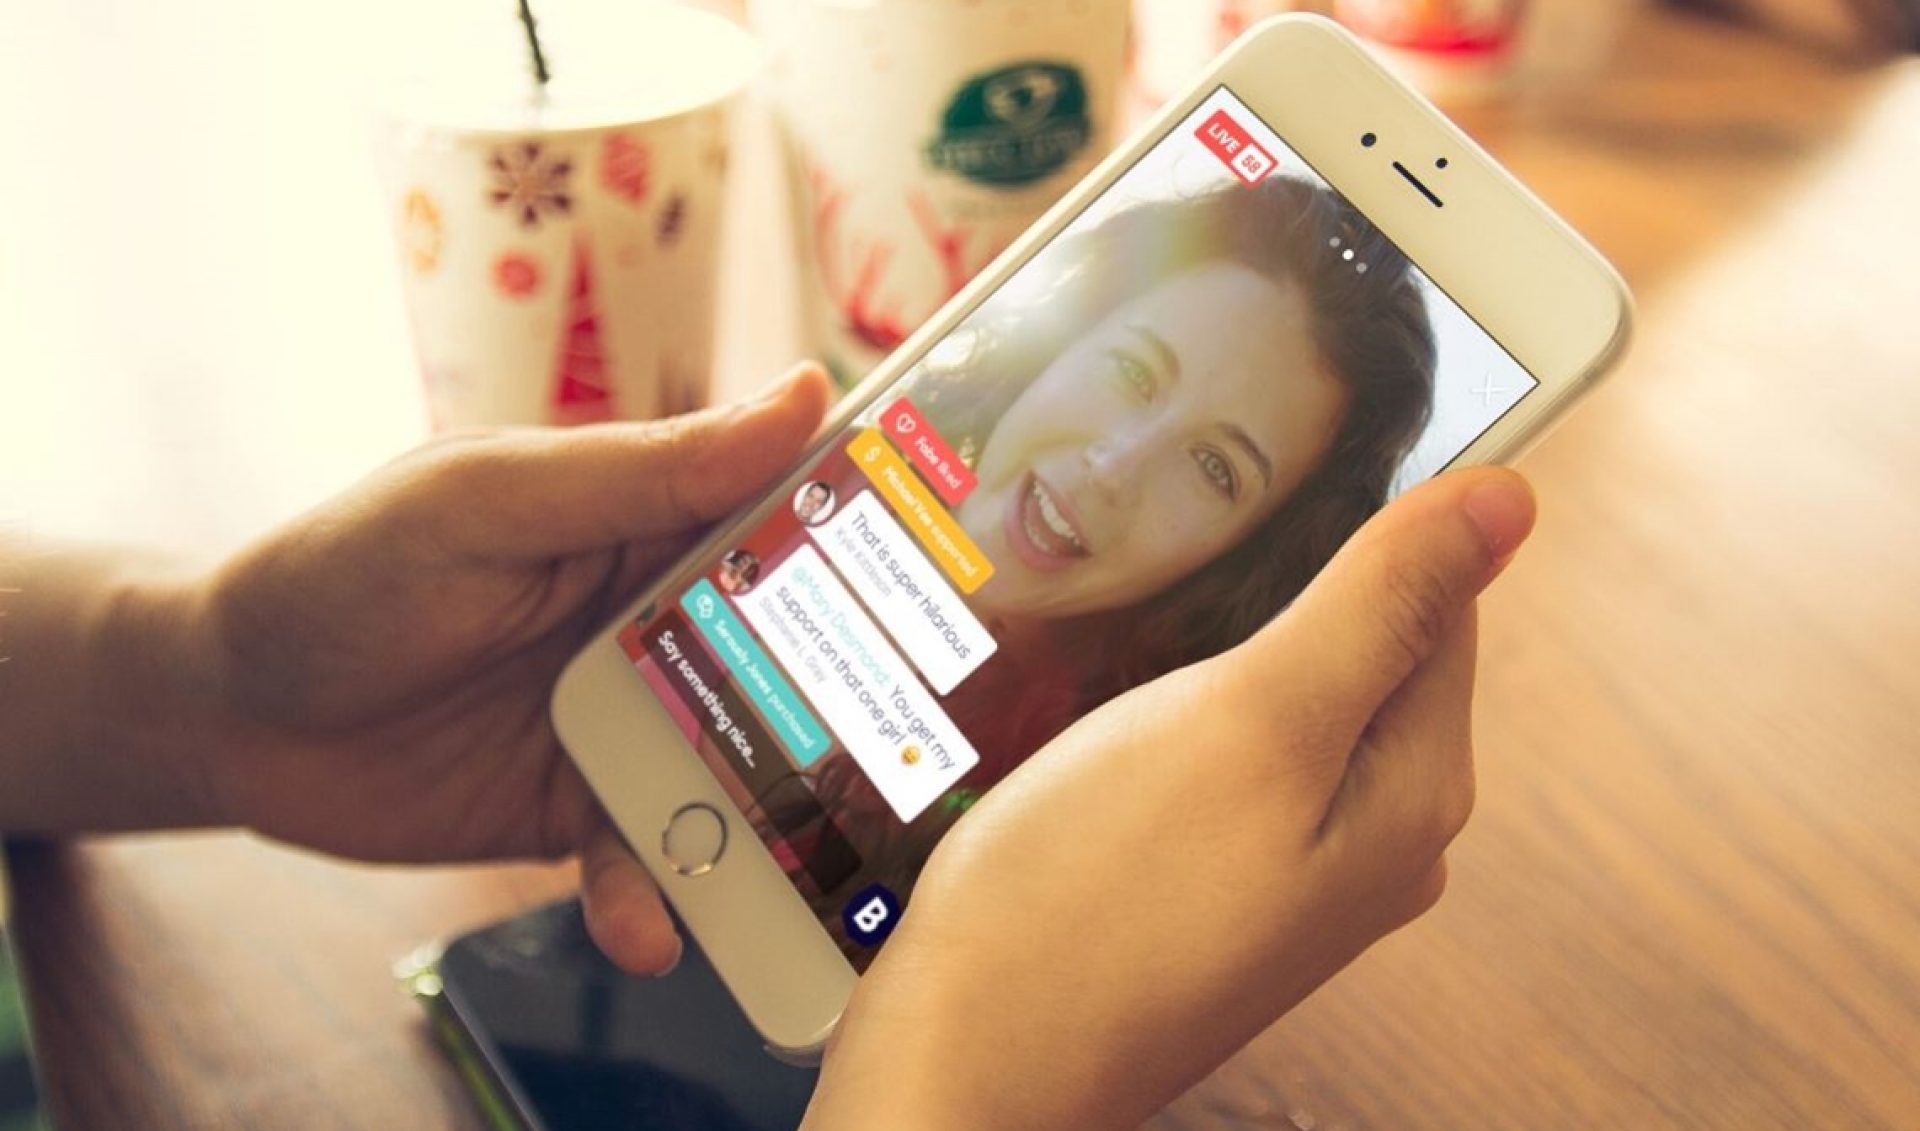 New Livestreaming App ‘Busker’ Aims To Merge Content And E-Commerce Capabilities